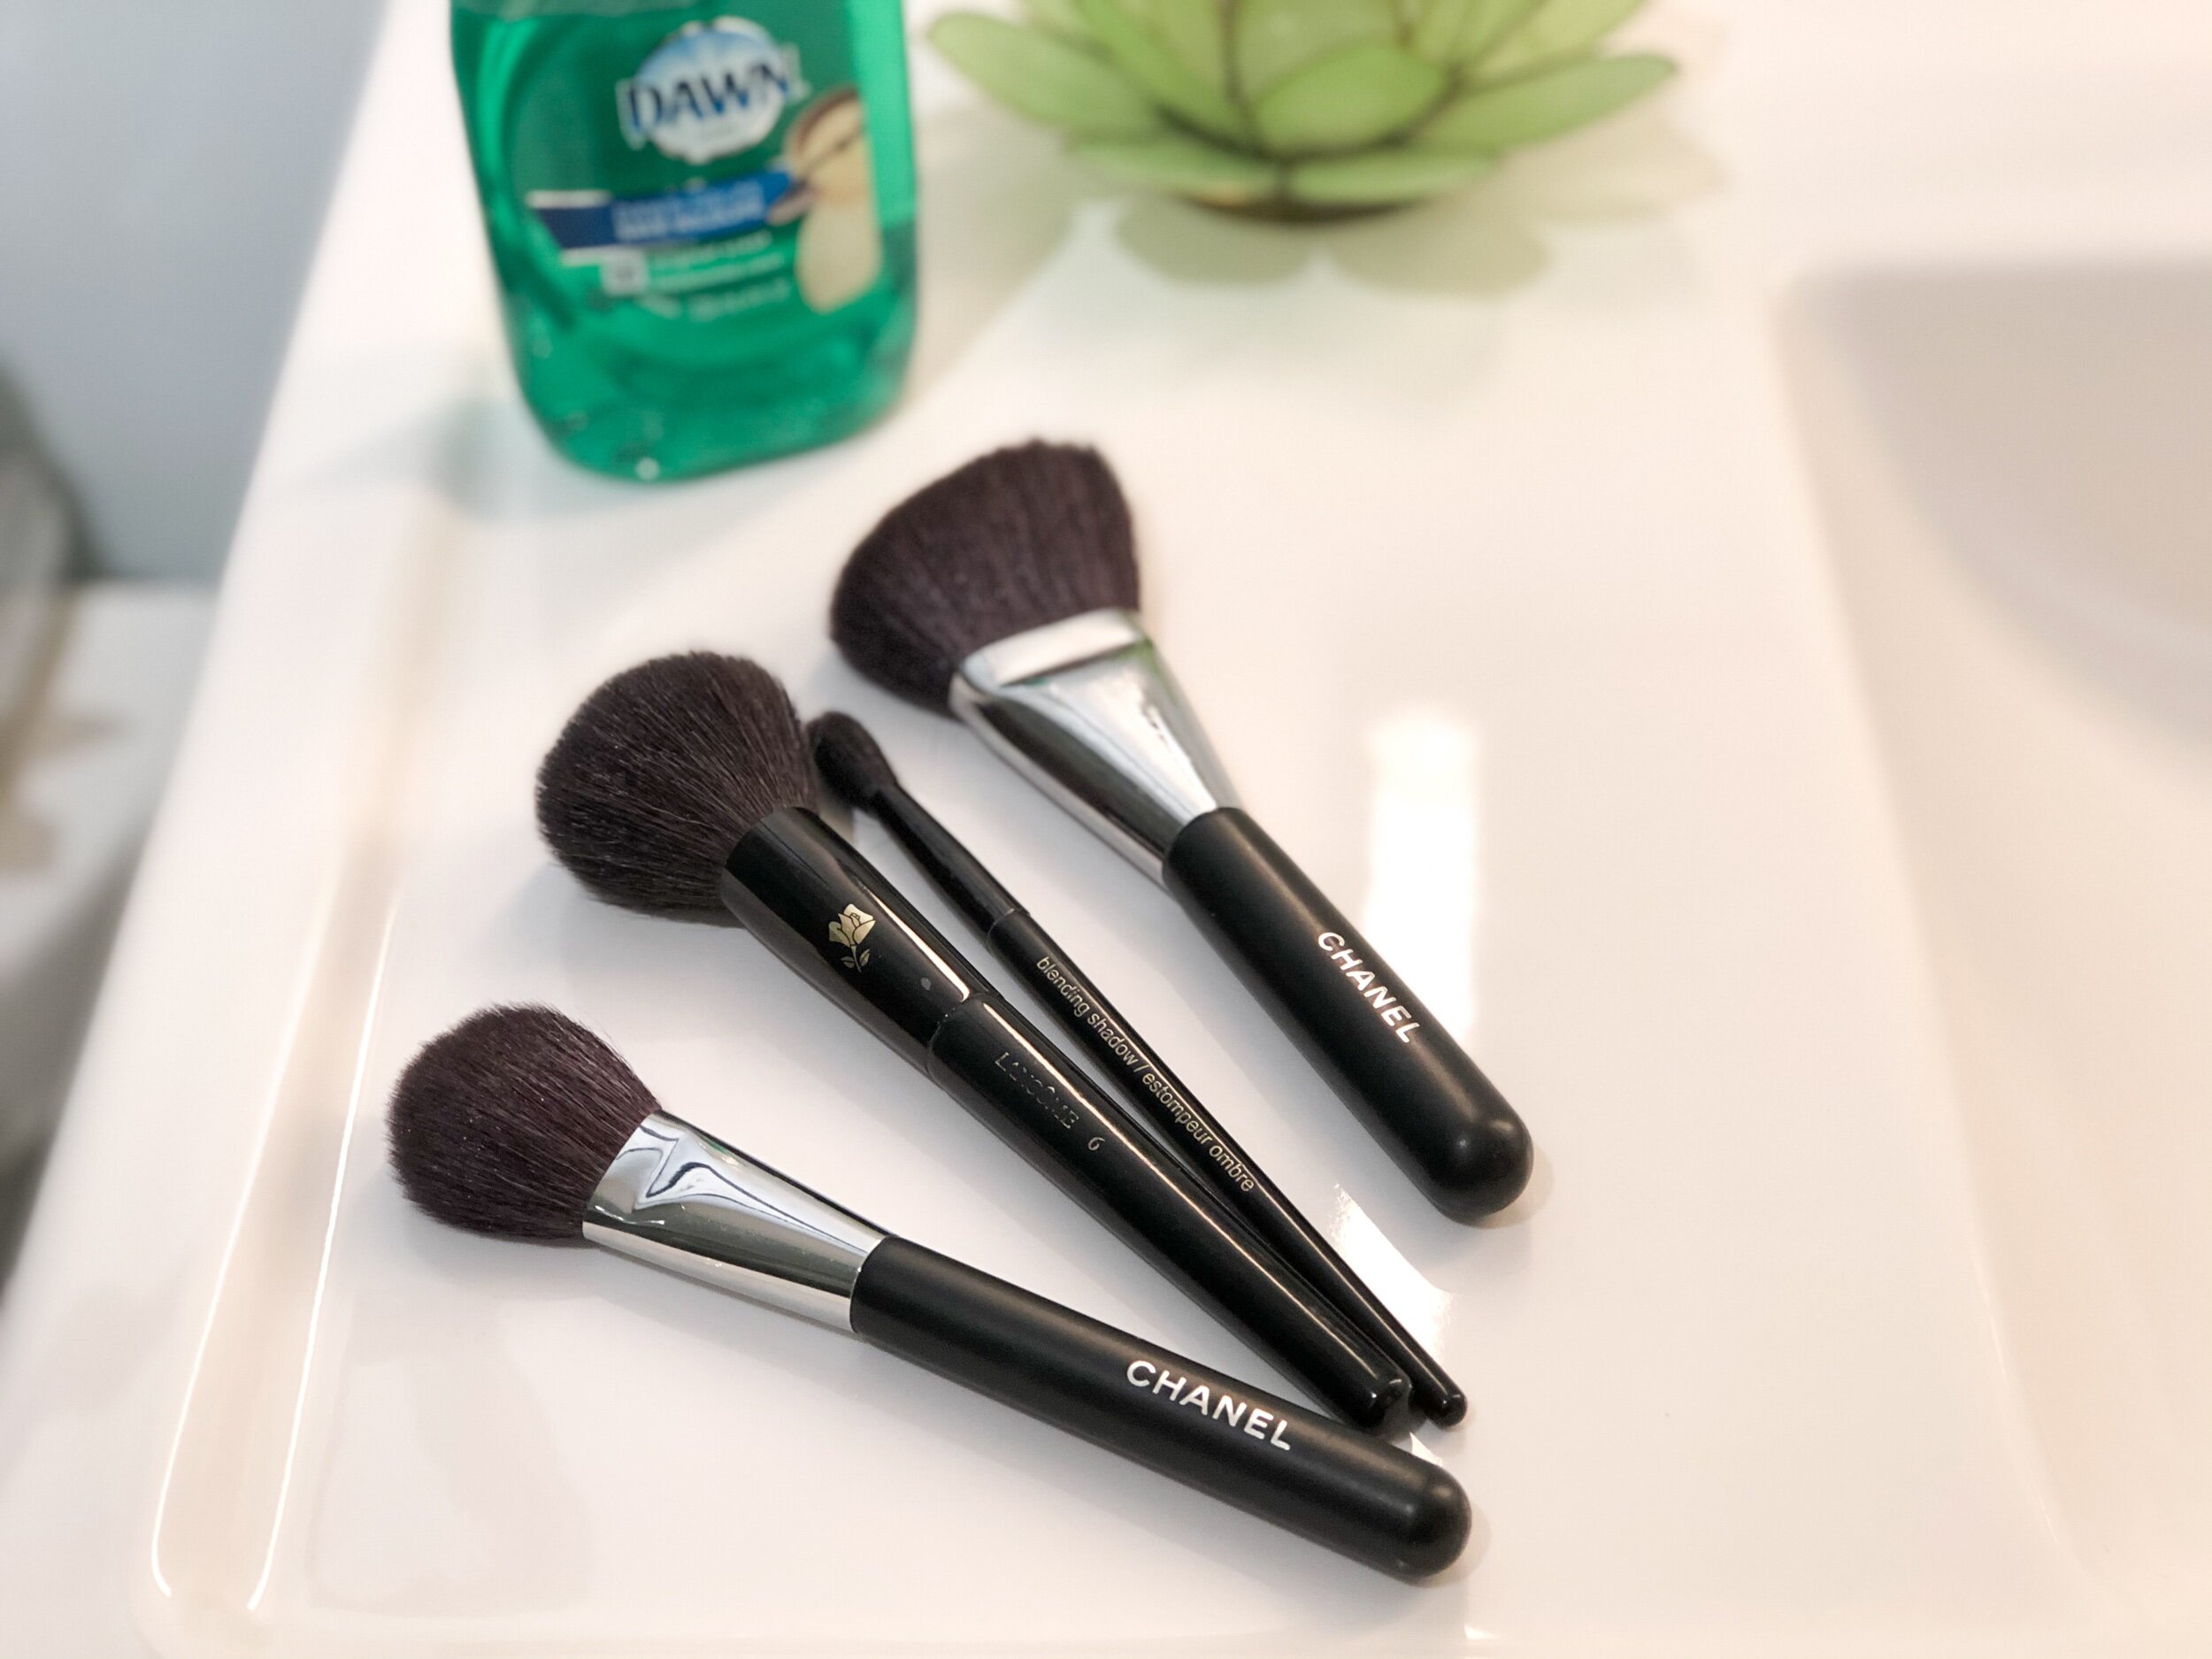 Stop Making These Makeup Brush Mistakes. — GISELLE DOZIER ARTISTRY